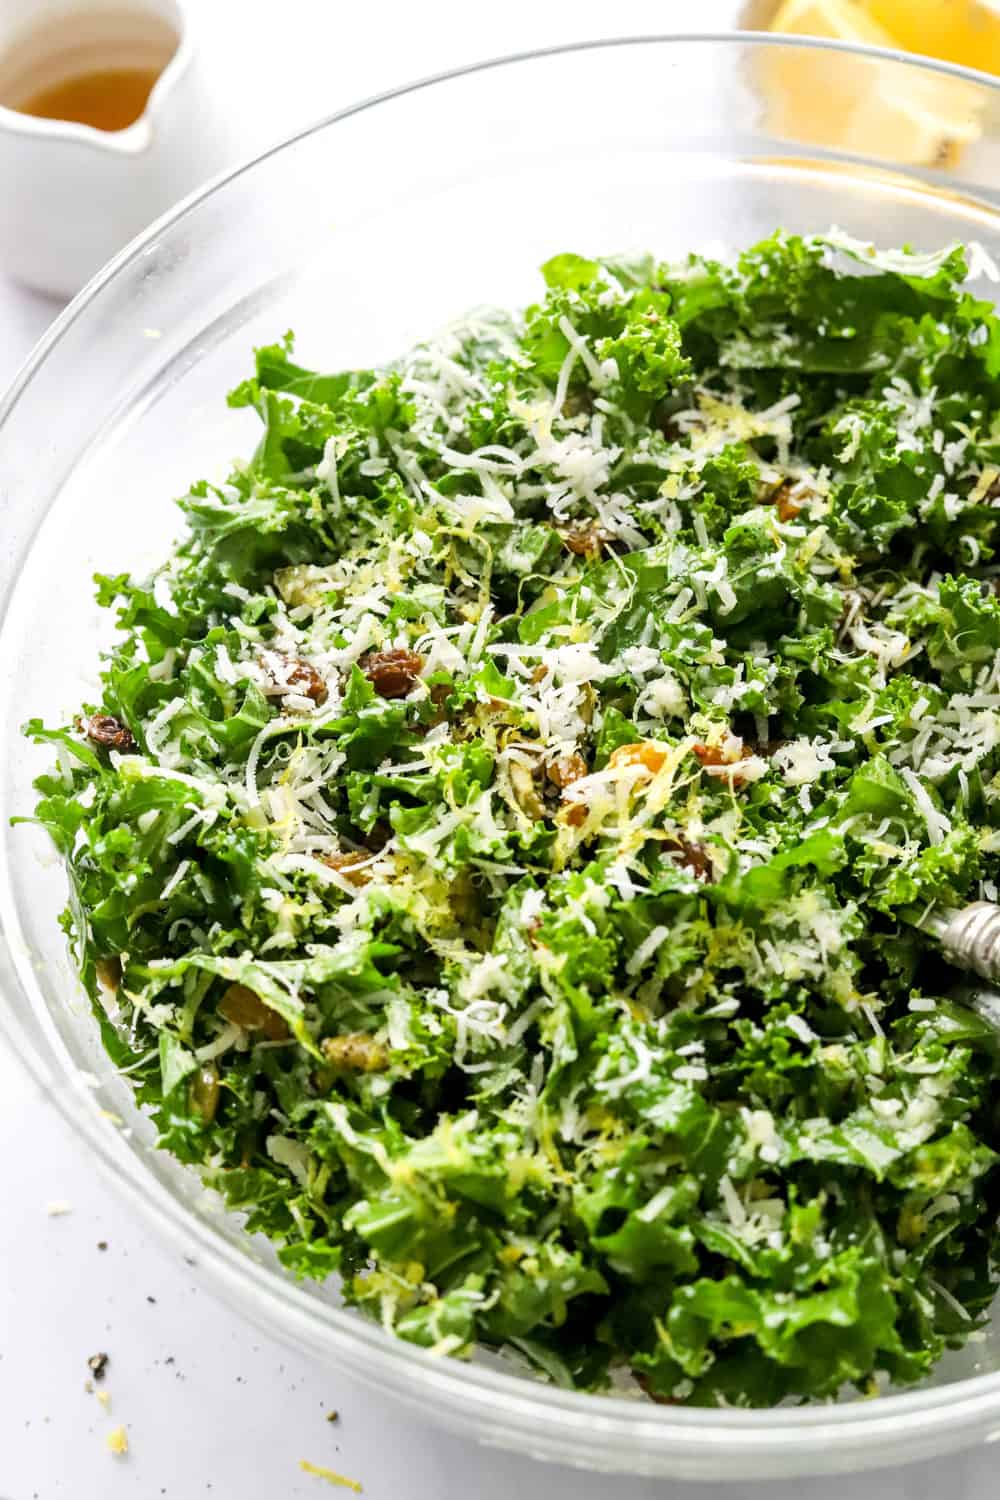 Chopped kale greens in a glass salad bowl topped with shredded cheese, lemon zest and nuts